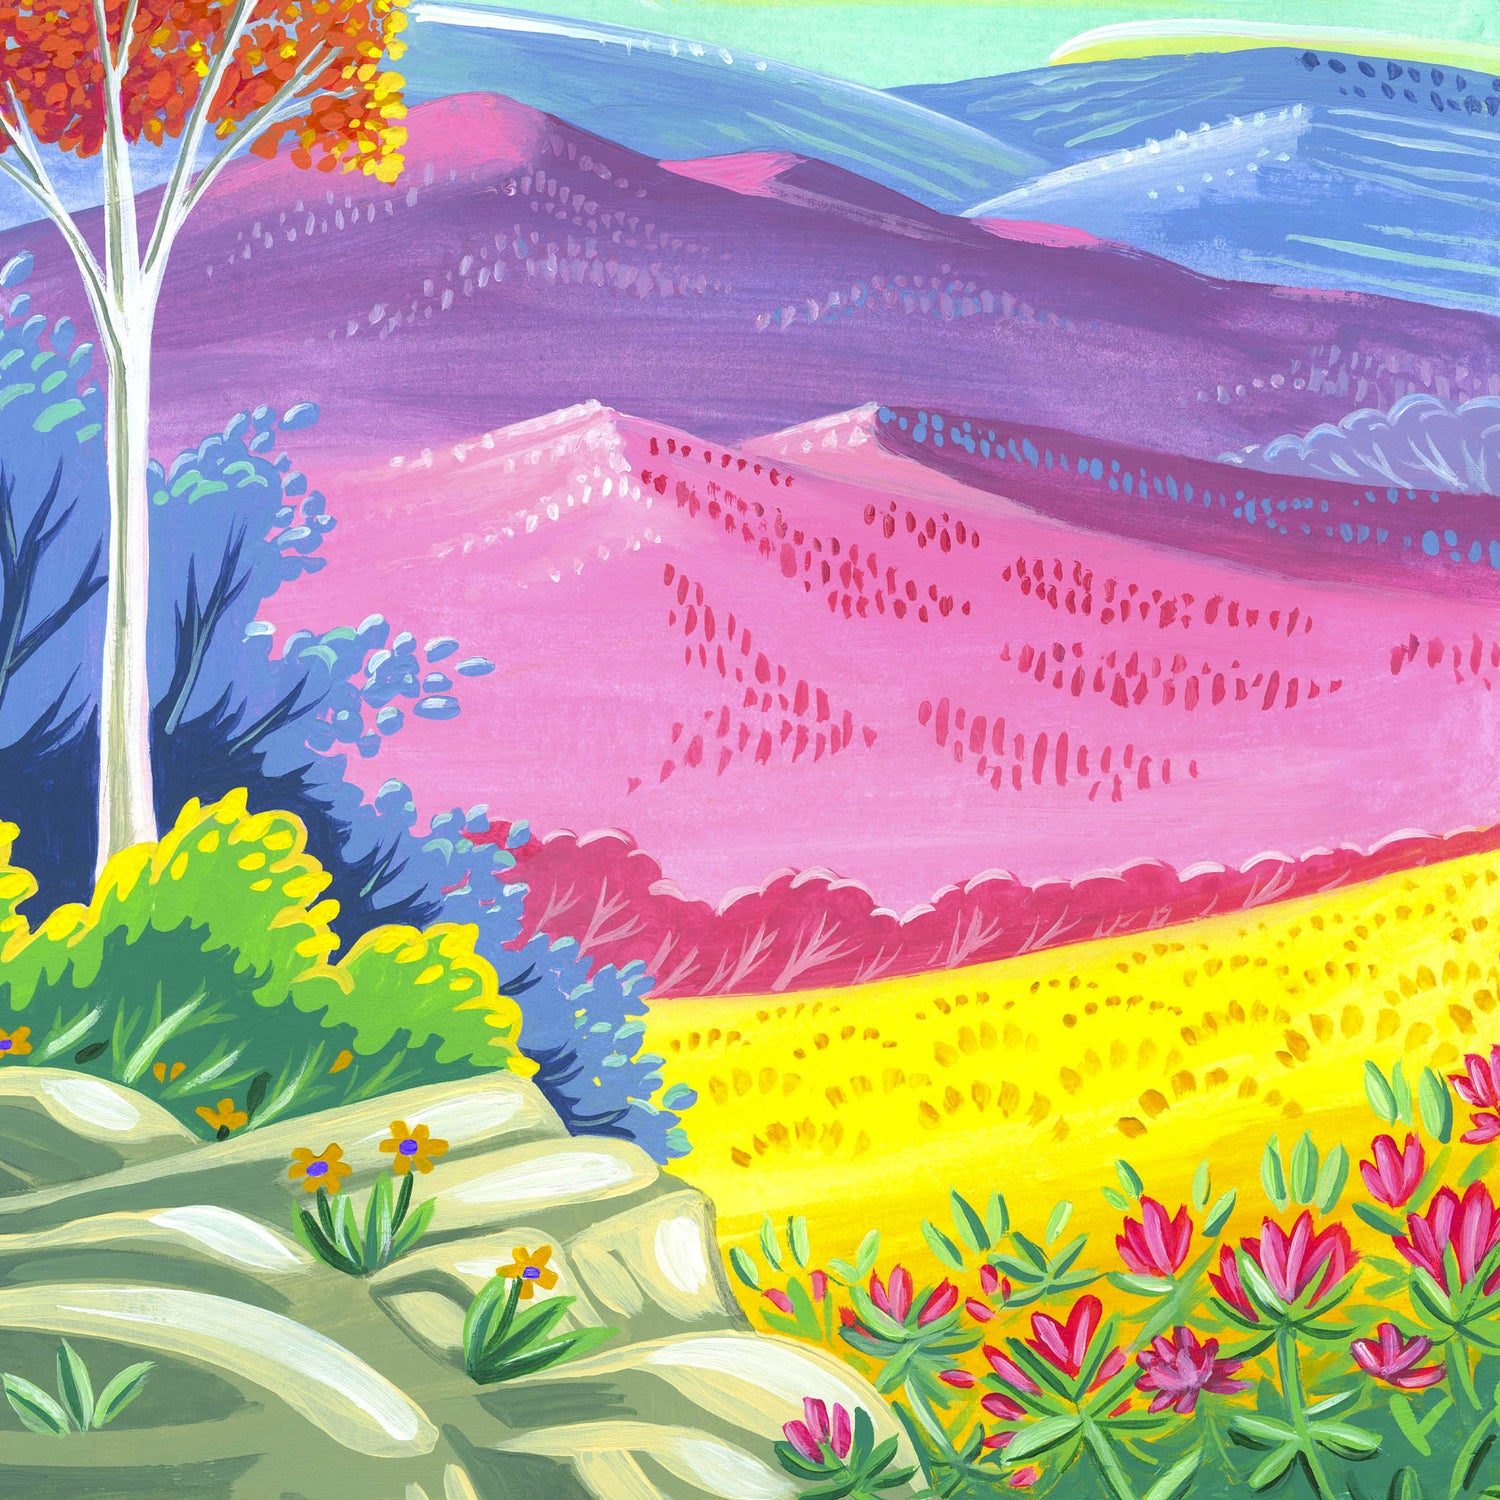 Shenandoah National Park art detail with flowers, forests, and Blue Ridge mountains; trendy illustration by Angela Staehling